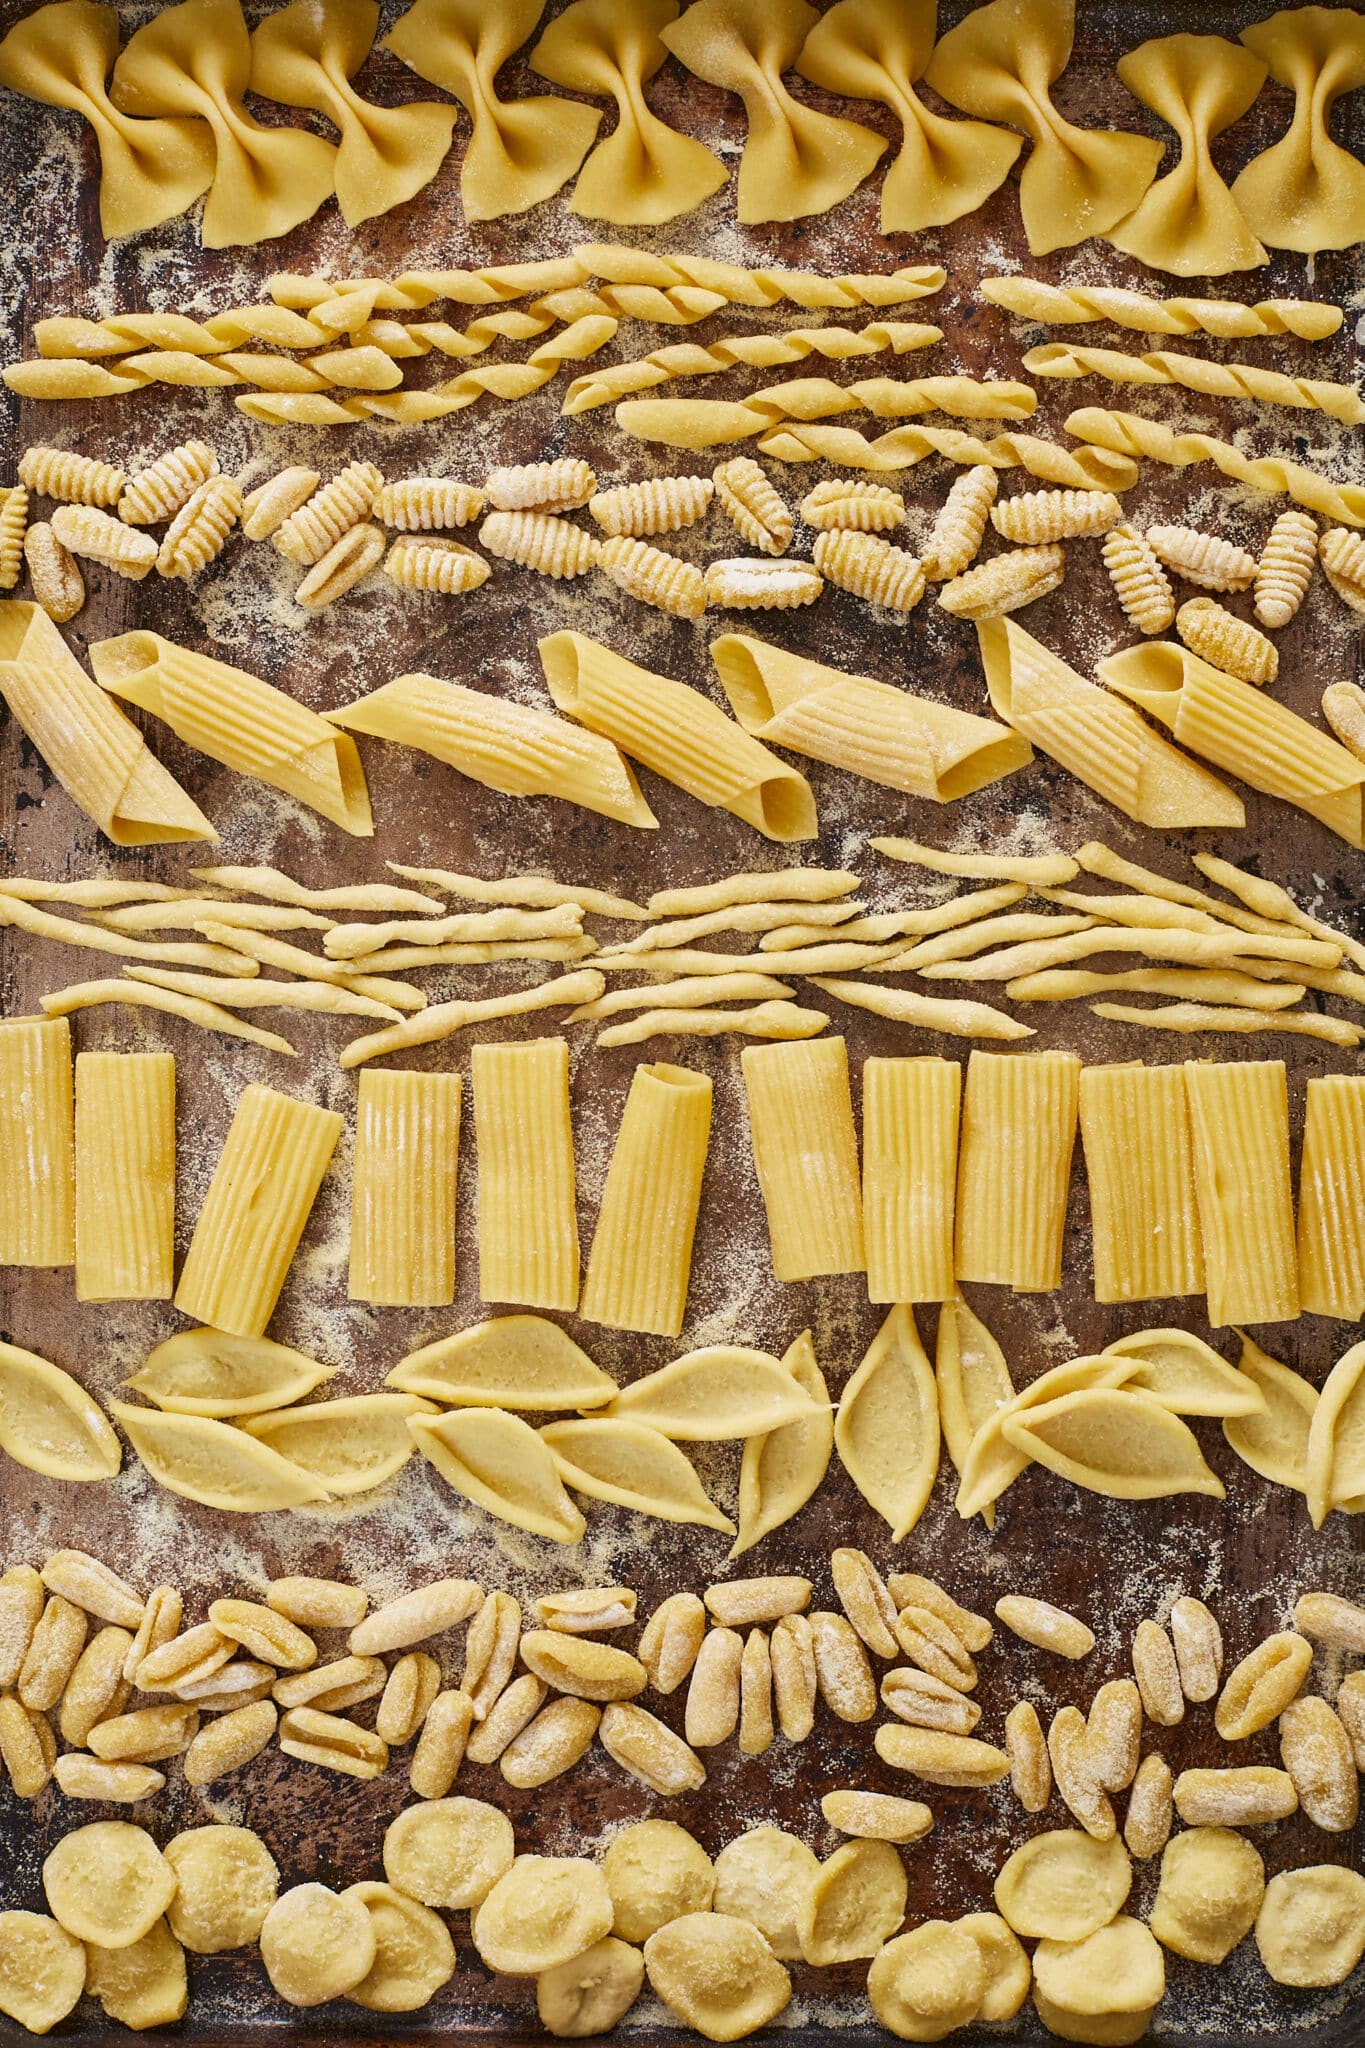 The authentic 2-Ingredient Semolina Pasta is in gorgeous yellow color and made into nine different shapes and sizes. From top to bottom are: Farfalle, Busiate, gnocchi, penne,Trofie, Rigatoni, Foglie, Malloreddus, Orecchiette Pasta. Very versatile in holding sauces. 